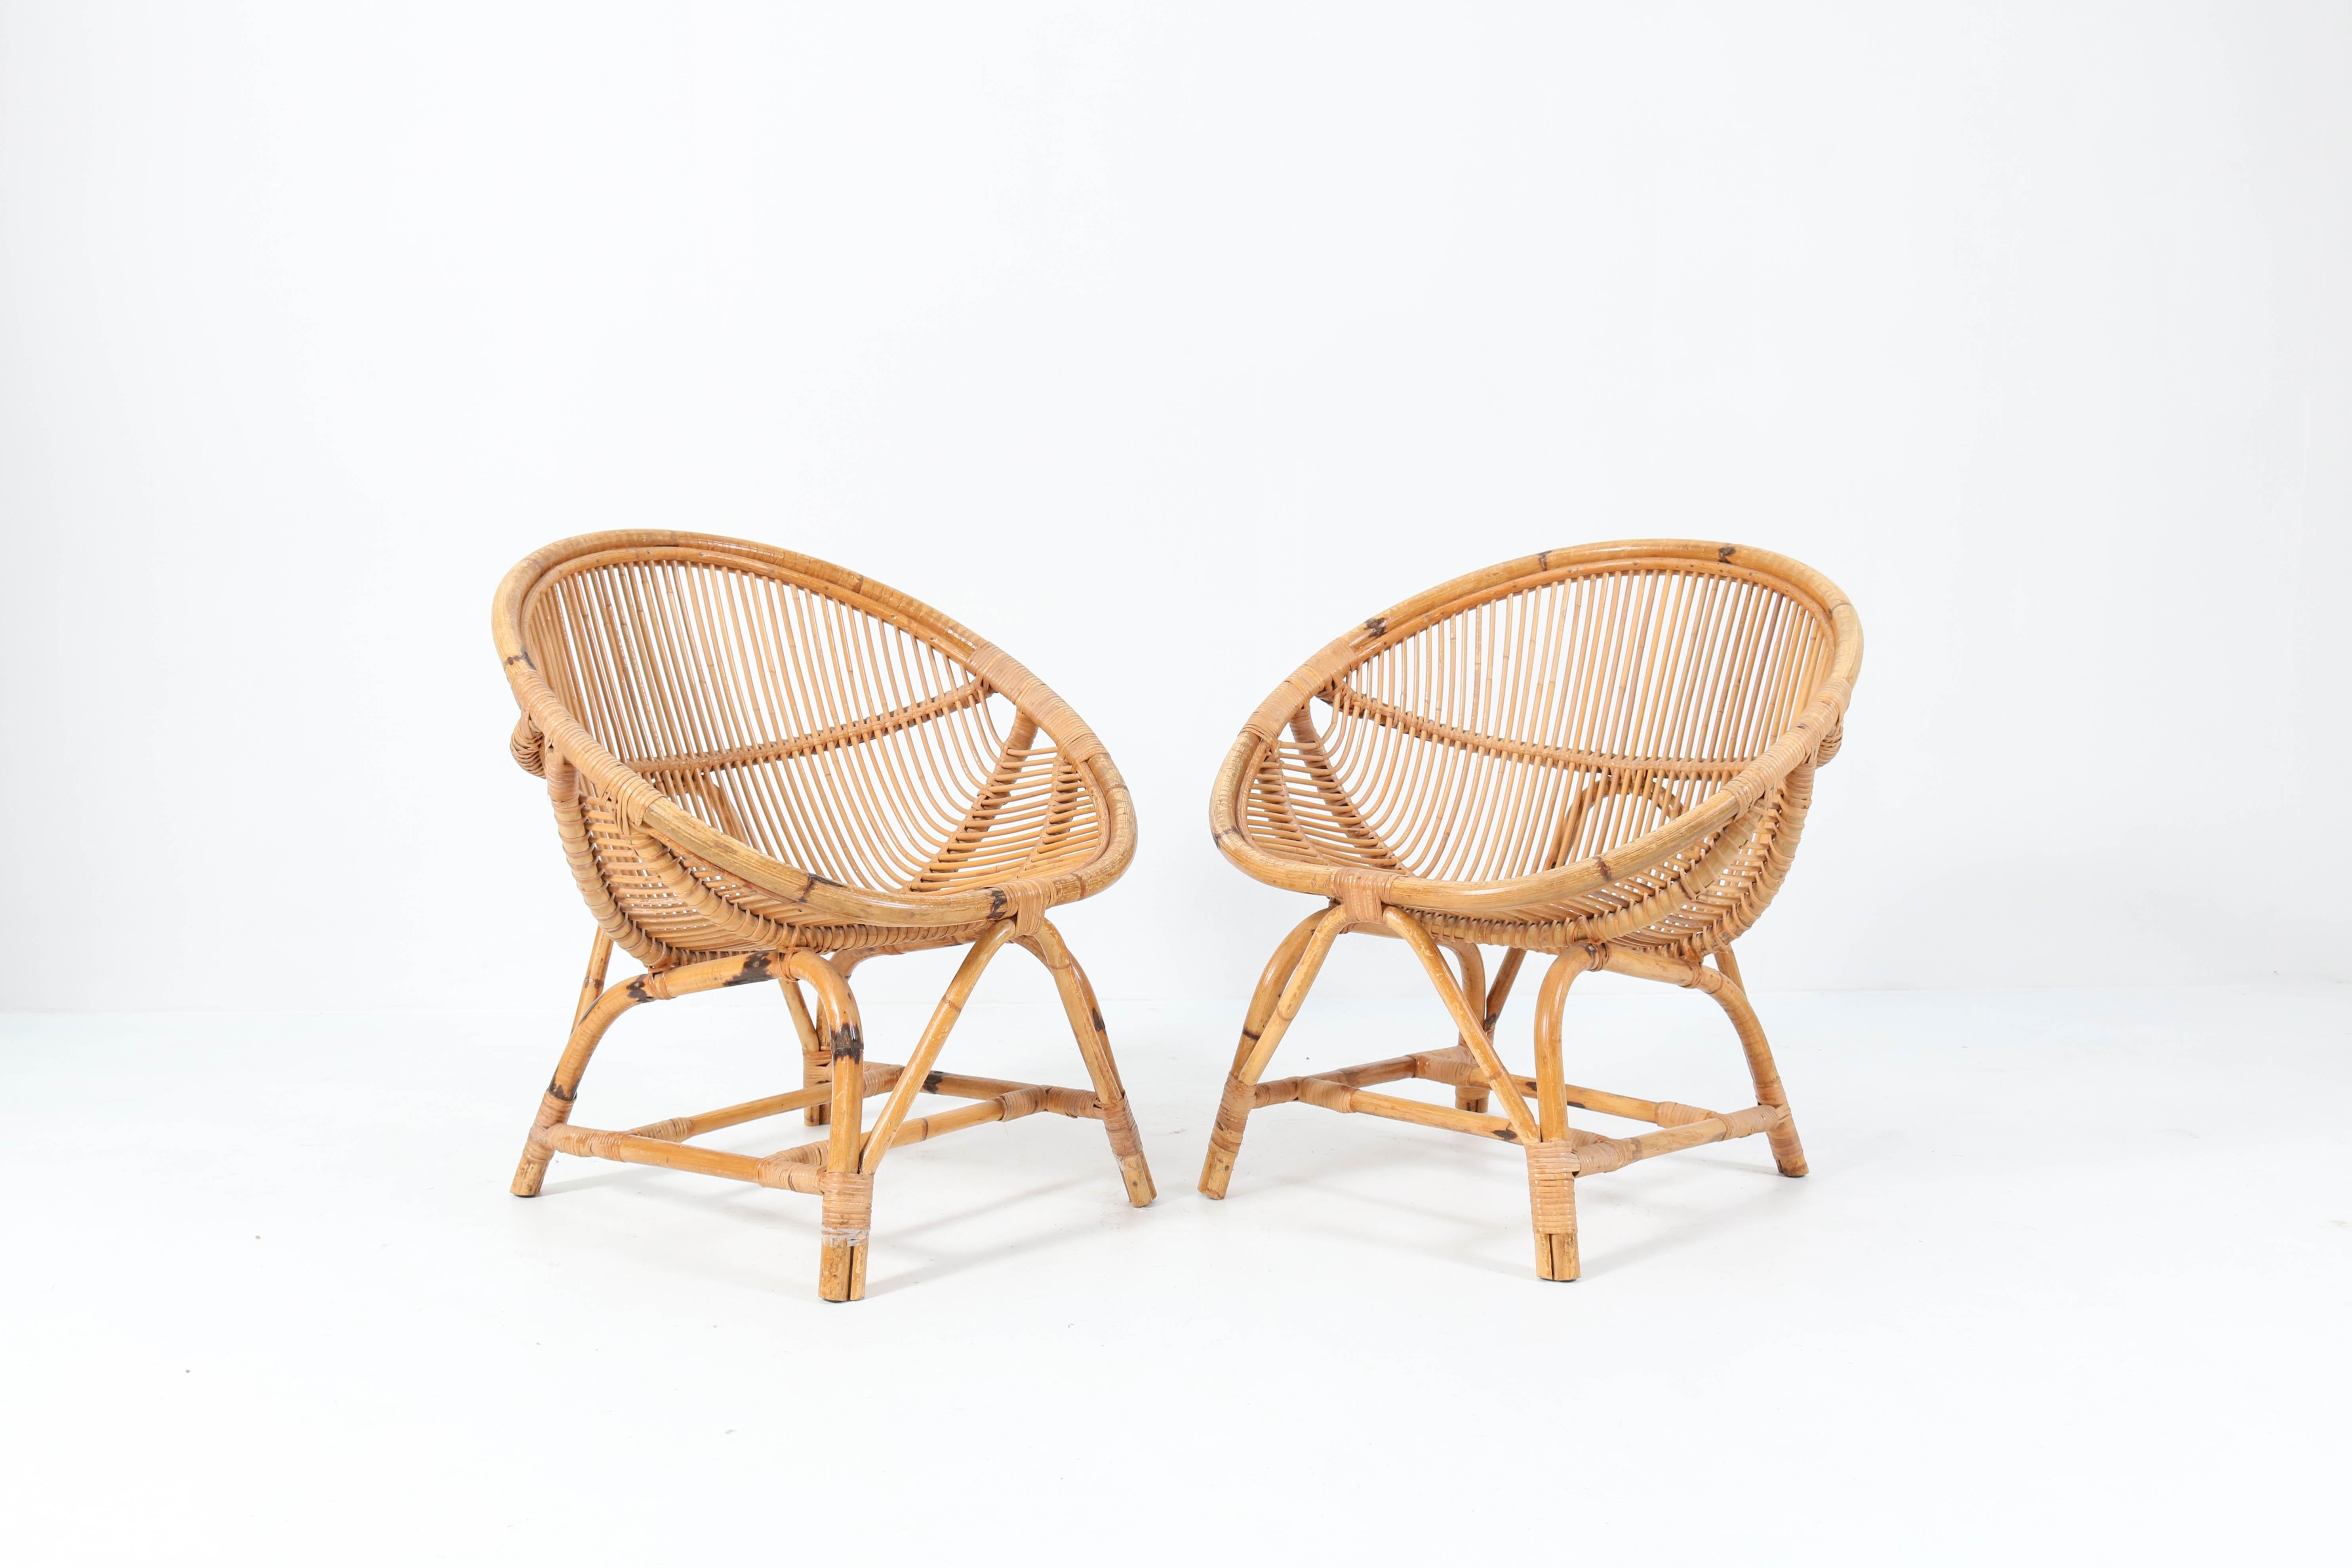 Stunning and rare pair of Mid-Century Modern lounge chairs.
Striking French design from the 1950s.
This wonderful pair is made of bamboo and rattan.
In very good condition with a beautiful patina.